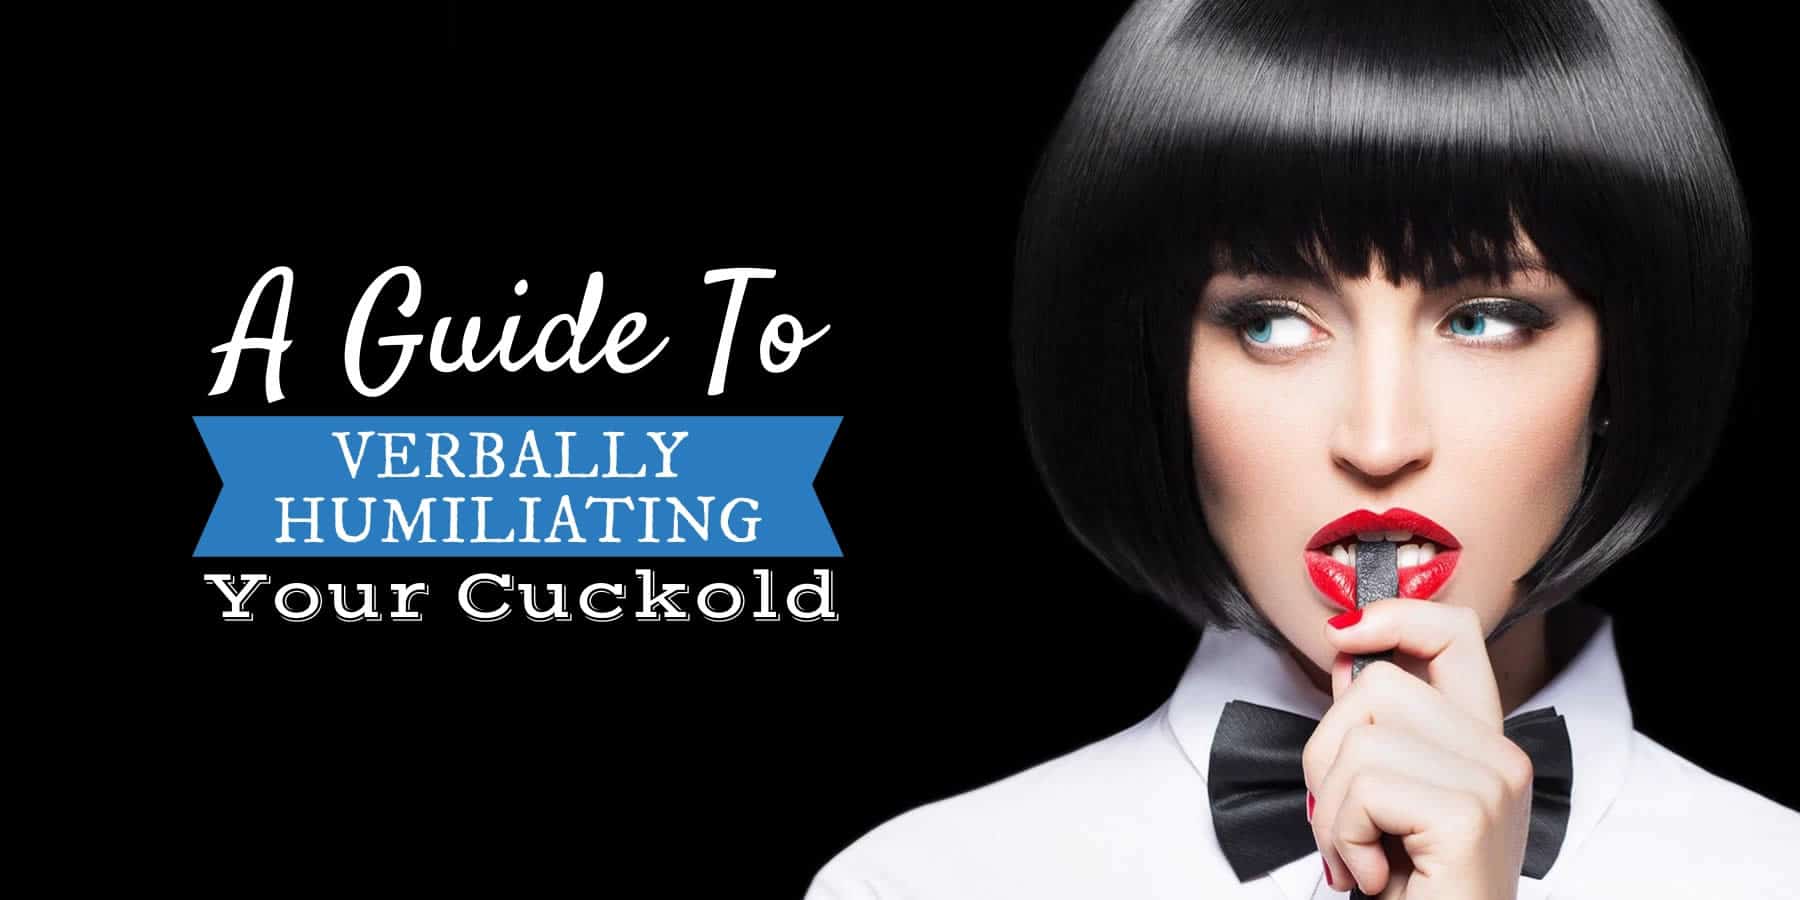 A Guide to Verbally Humiliating Your Cuckold (with Examples) picture image